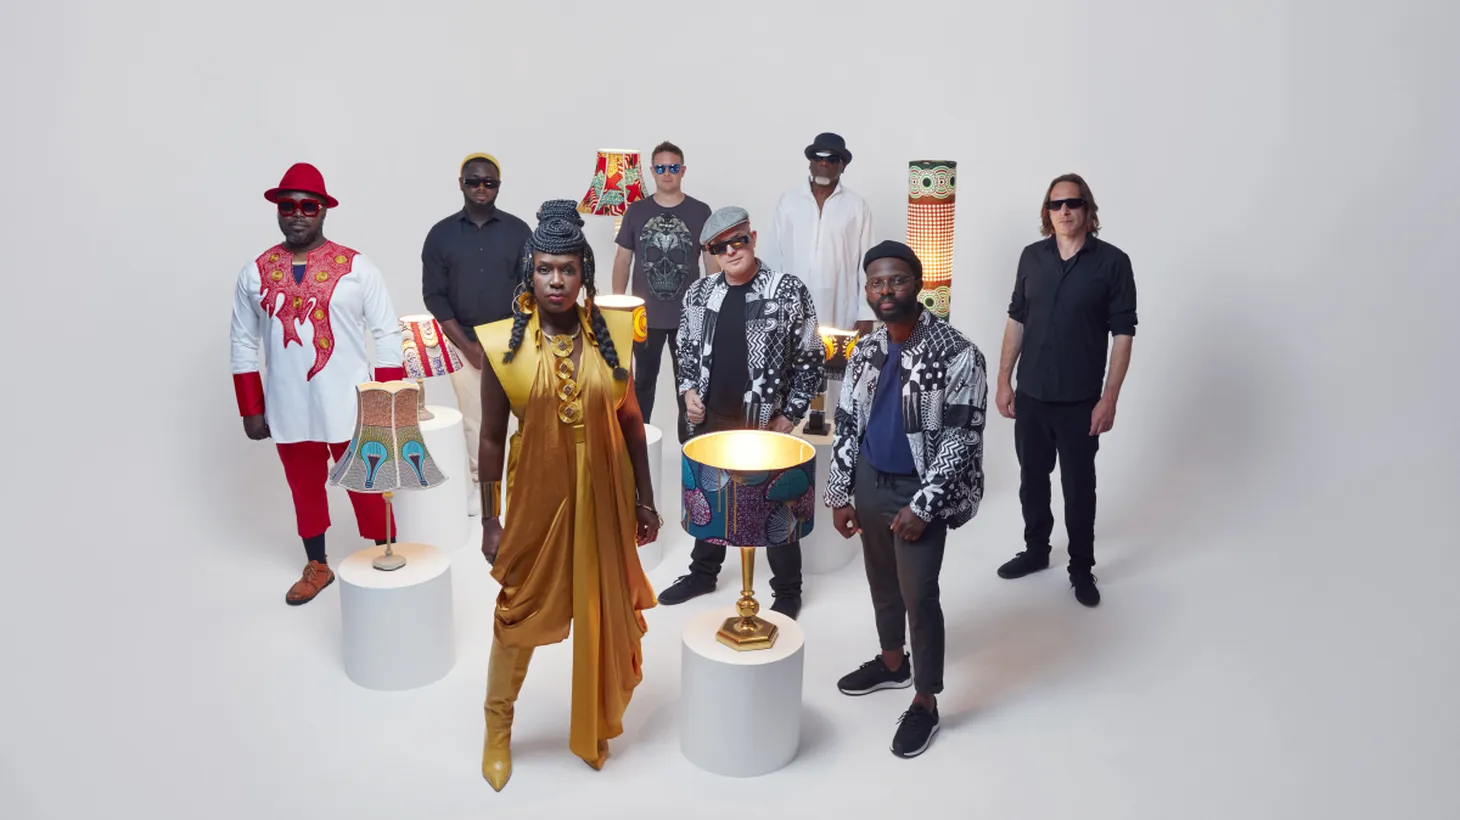 A thrilling collaboration was born from a mutual love shared between Afro-funk collective Ibibio Sound Machine, and Grammy Award winning, indie-dance pioneers Hot Chip.